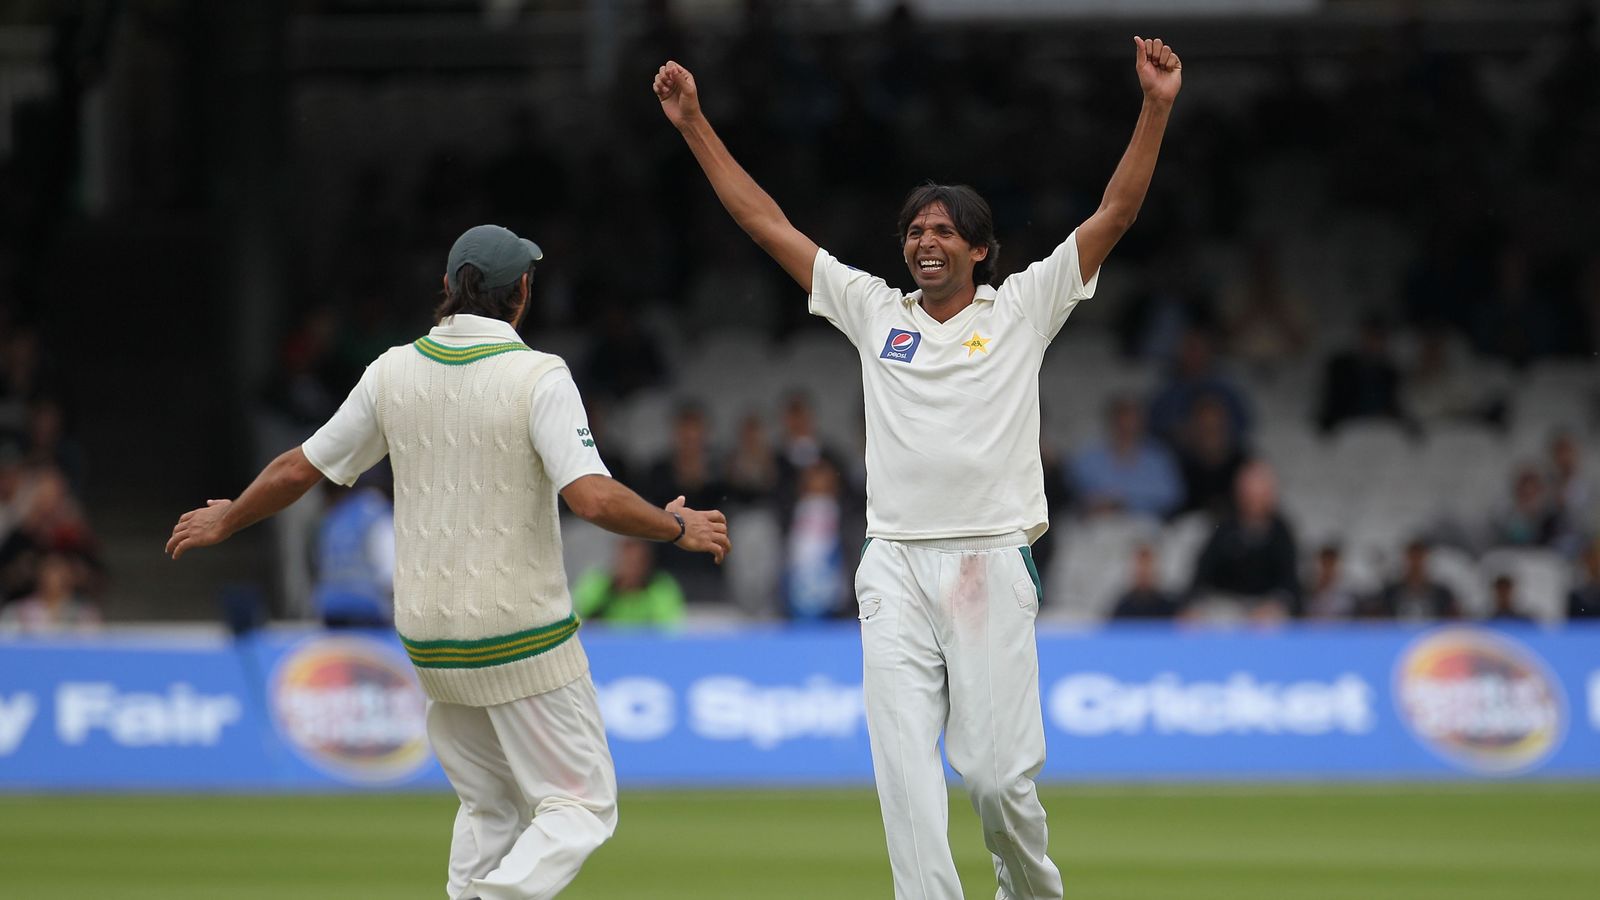 Kevin Pietersen Names Mohammad Asif As The Best Bowler - Test Cricket , HD Wallpaper & Backgrounds